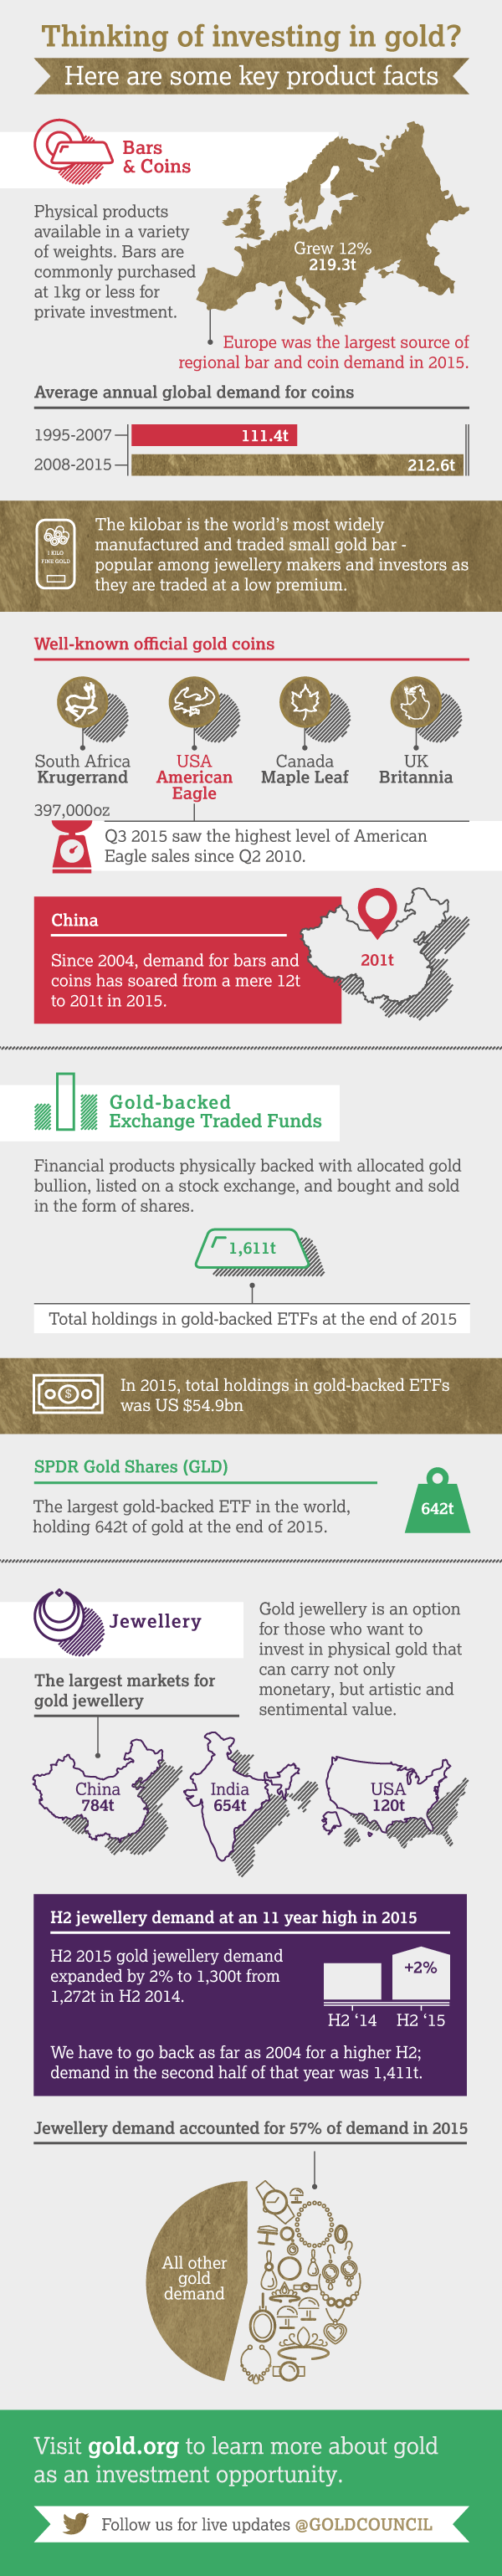 Download our gold investment infographic; explaining key gold product groups. This graphic focusses on Bars & Coins, Gold-backed Exchange Traded Funds and Jewellery.